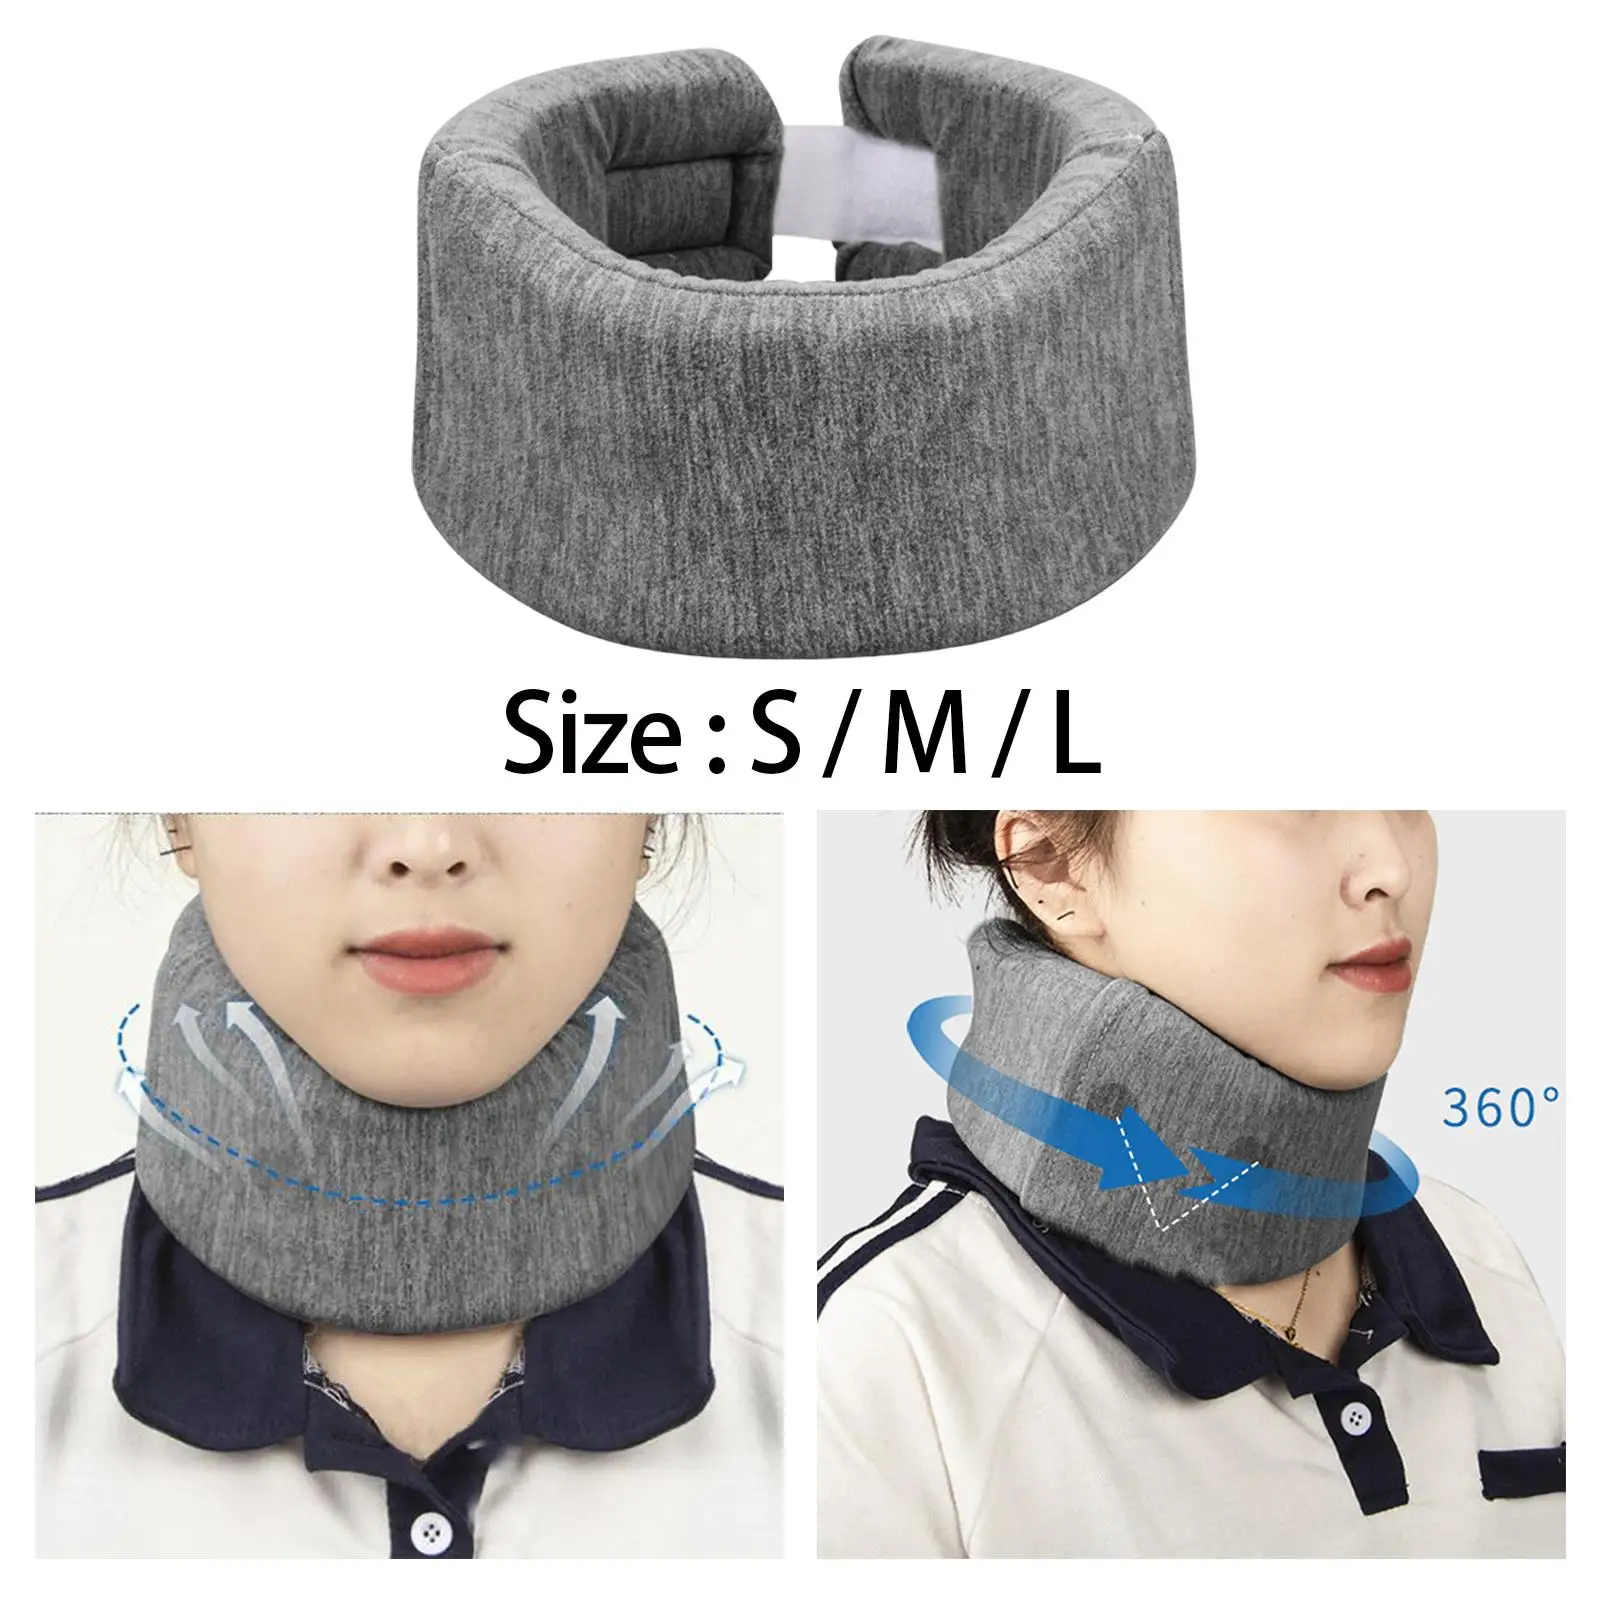 Travel Pillow Breathable Soft Comfortable Head Neck Support Easy to Use Neck Pillow for Home Rest Use Plane Office Airplane Car